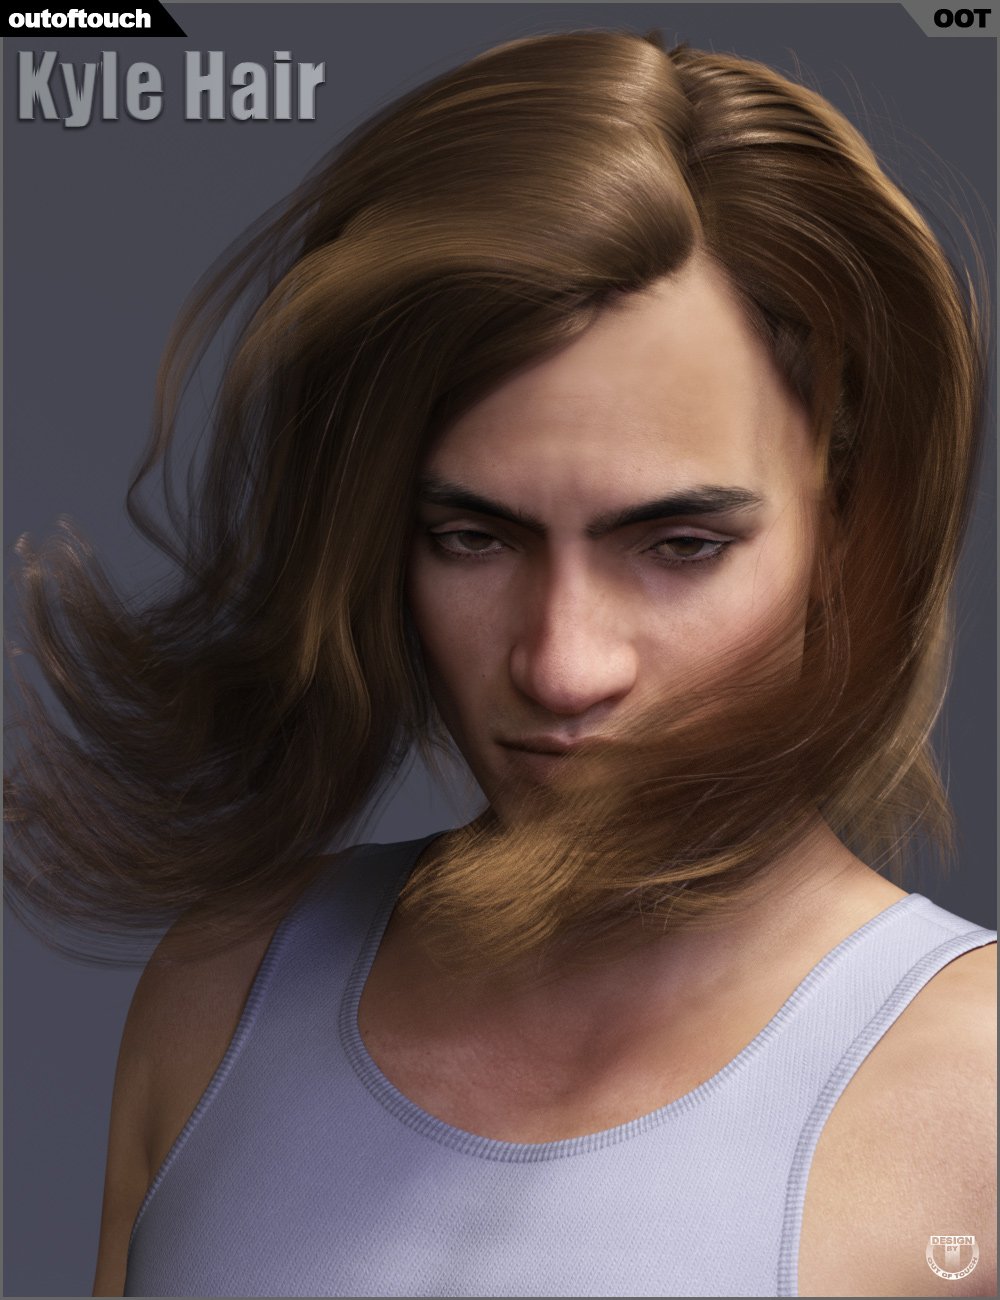 Kyle Hair by: outoftouch, 3D Models by Daz 3D